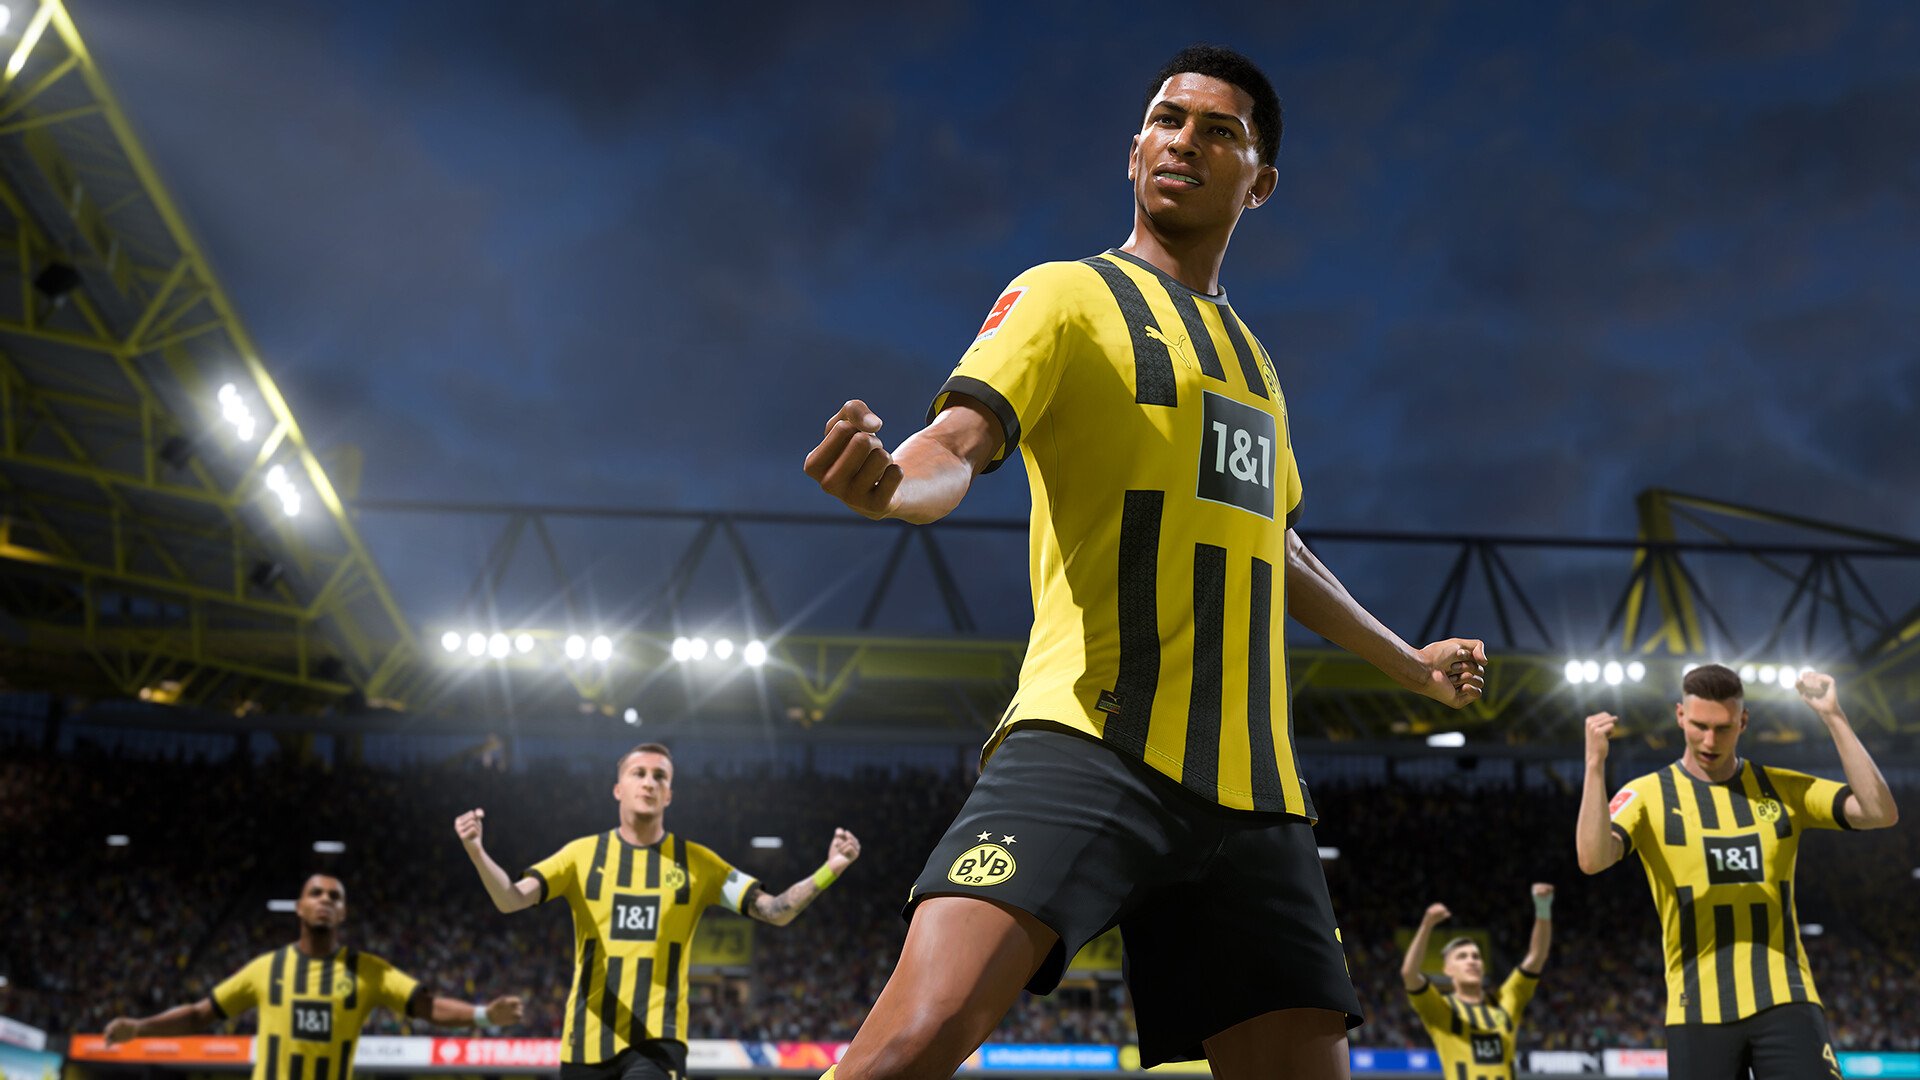 FIFA 23 hits Xbox Game Pass Ultimate and EA Play next week